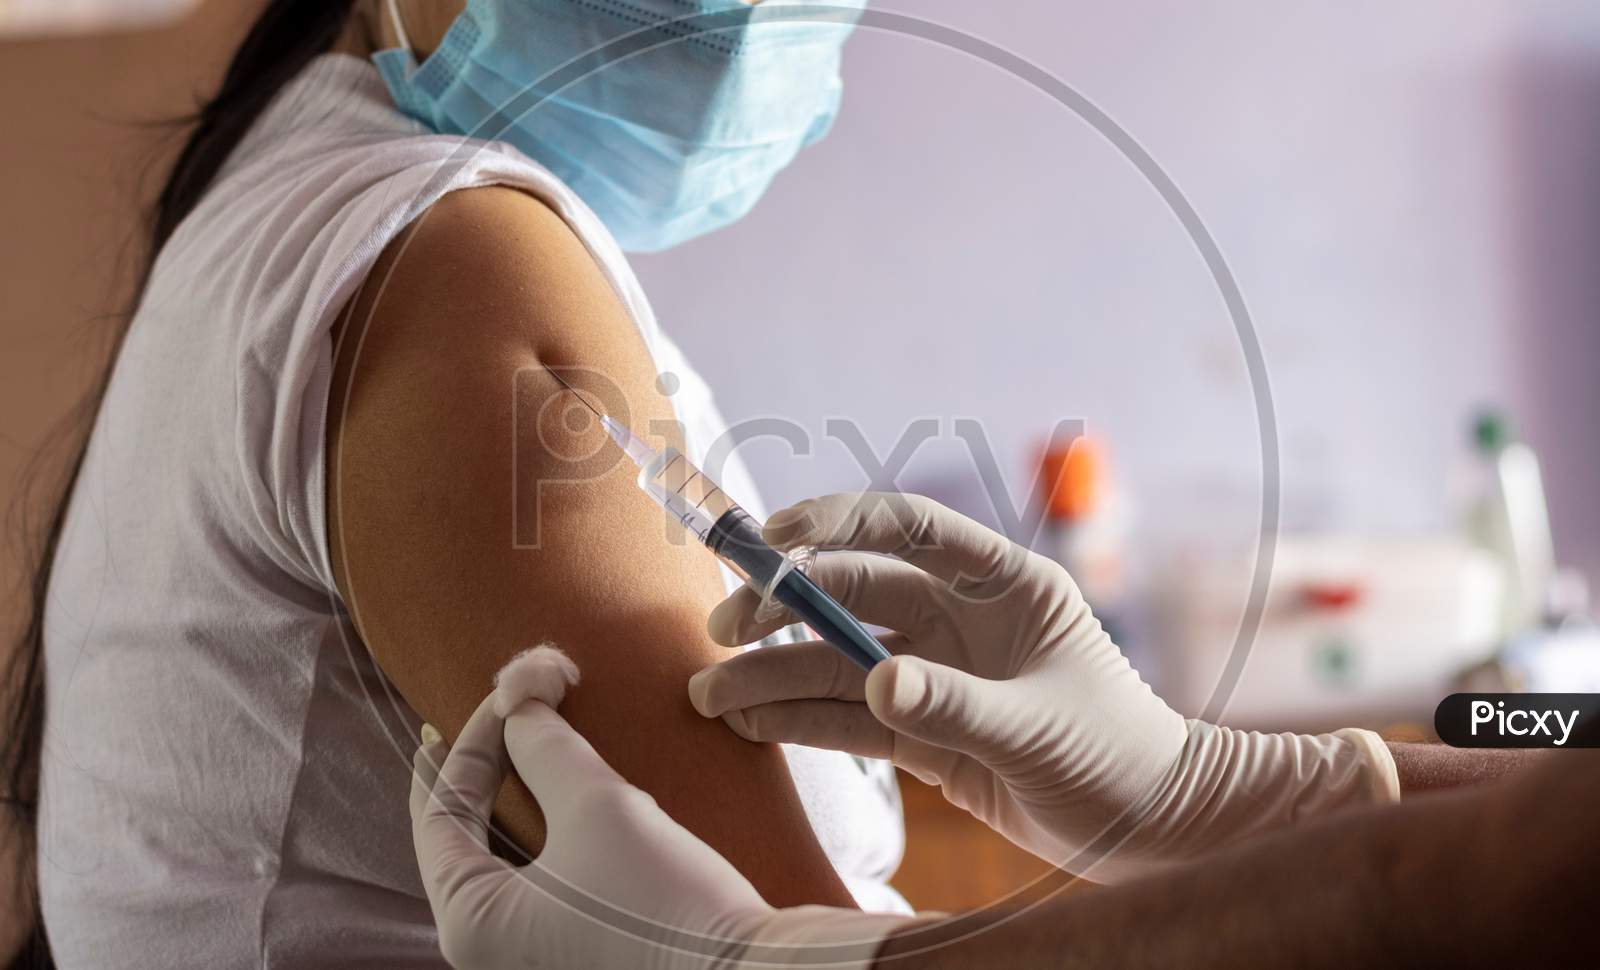 Vaccination For Pandemic Covid-19